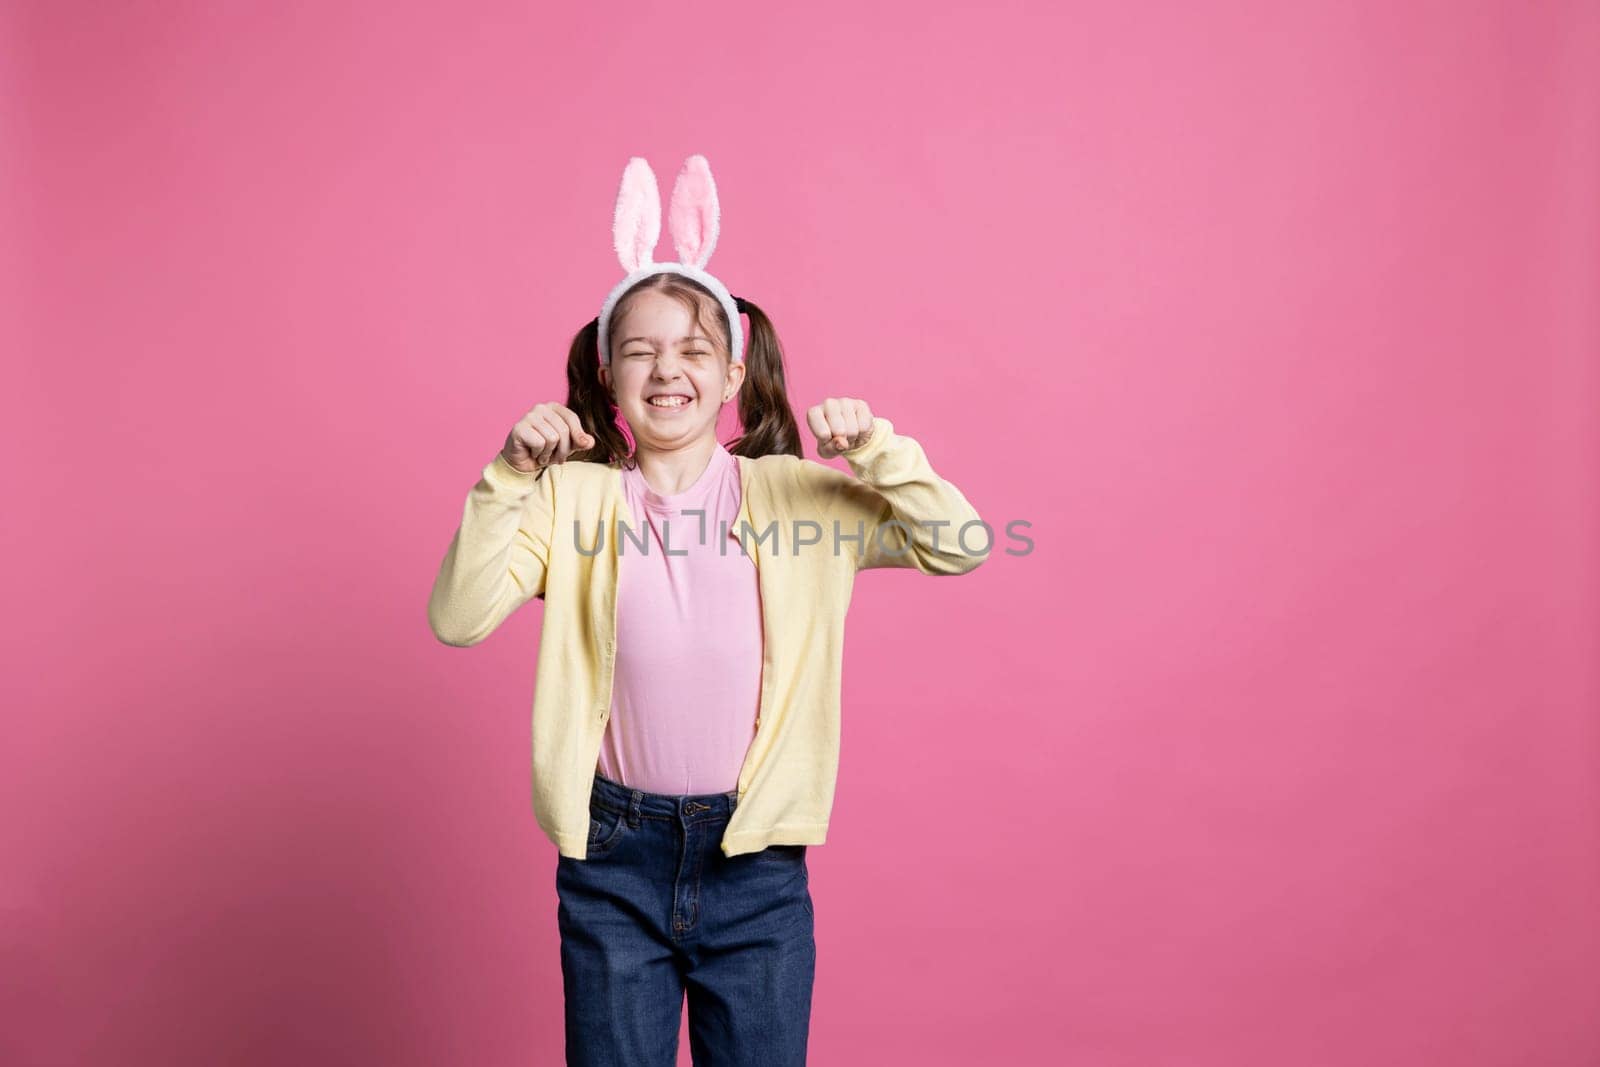 Delightful child imitates a rabbit for the Easter celebration, hopping in the studio while she is wearing bunny ears. Cheerful young kid jumping against pink backdrop, acting goofy and amusing.